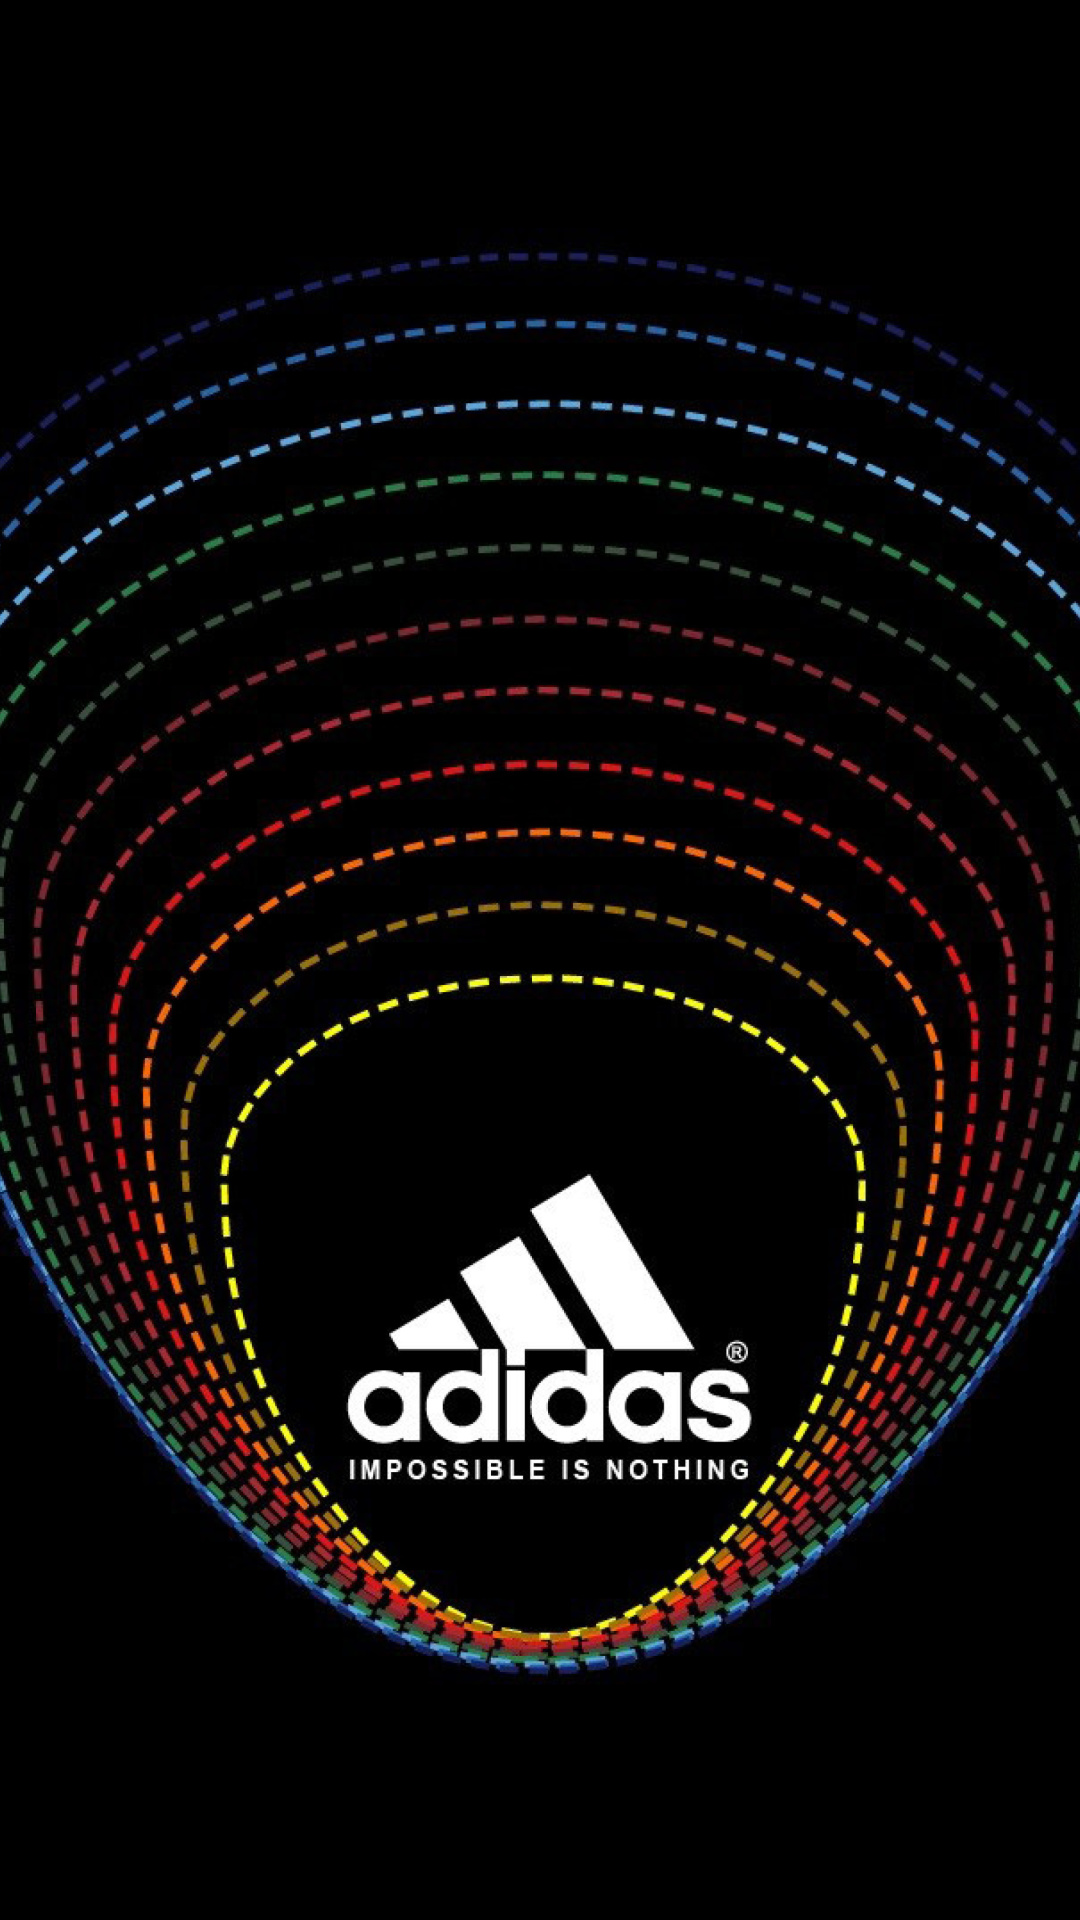 Das Adidas Tagline, Impossible is Nothing Wallpaper 1080x1920